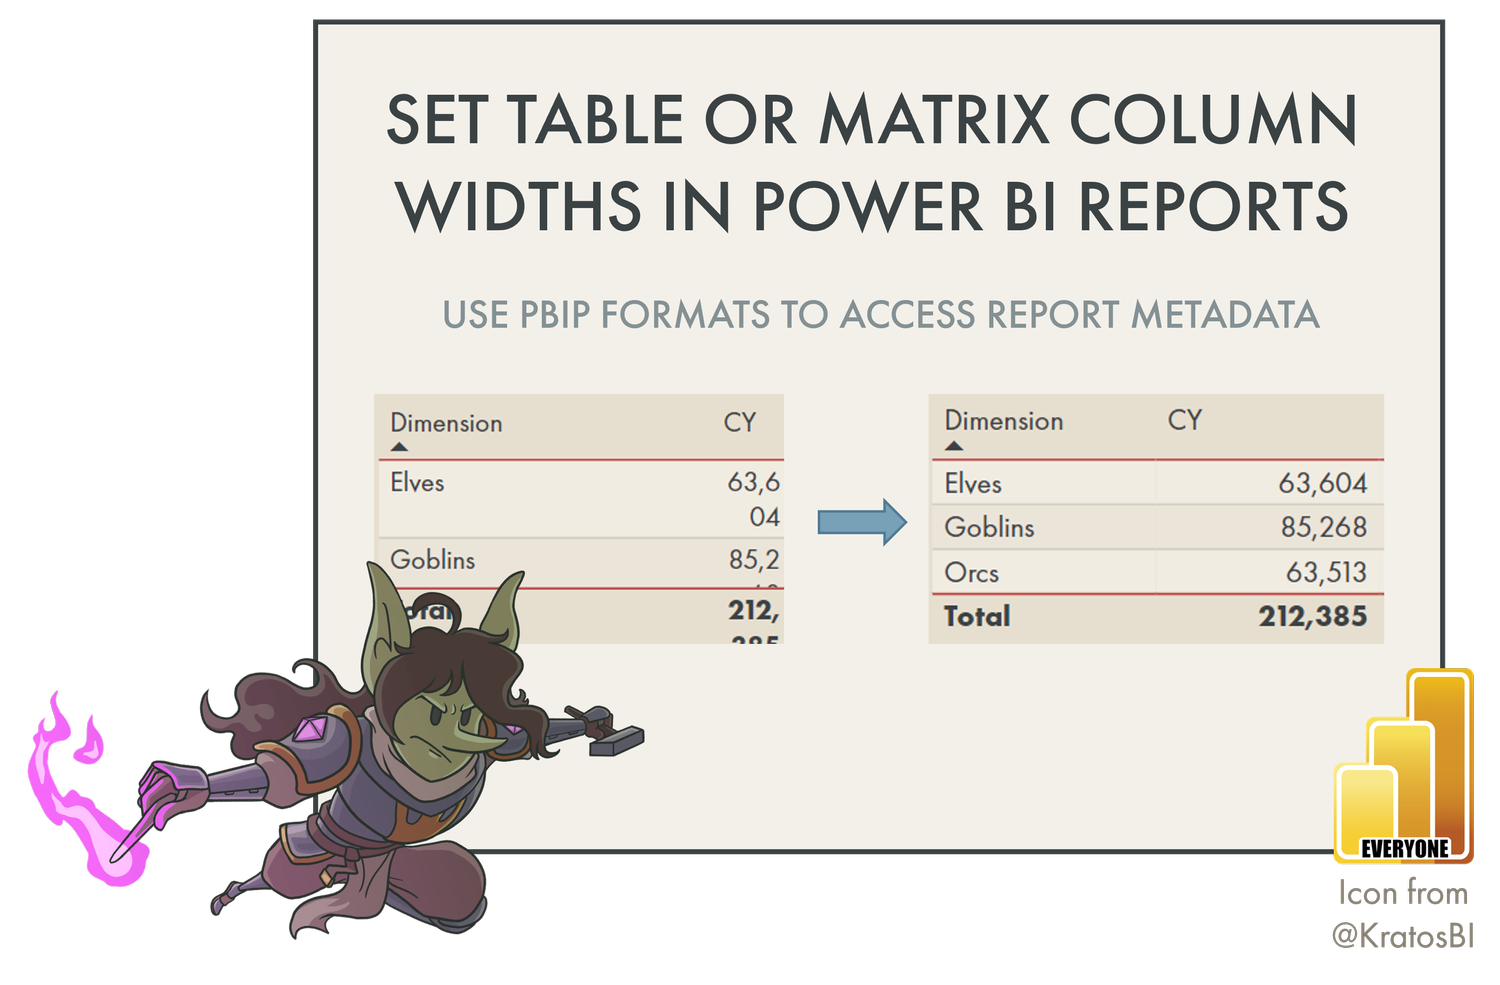 How to set table or matrix column widths in a Power BI report